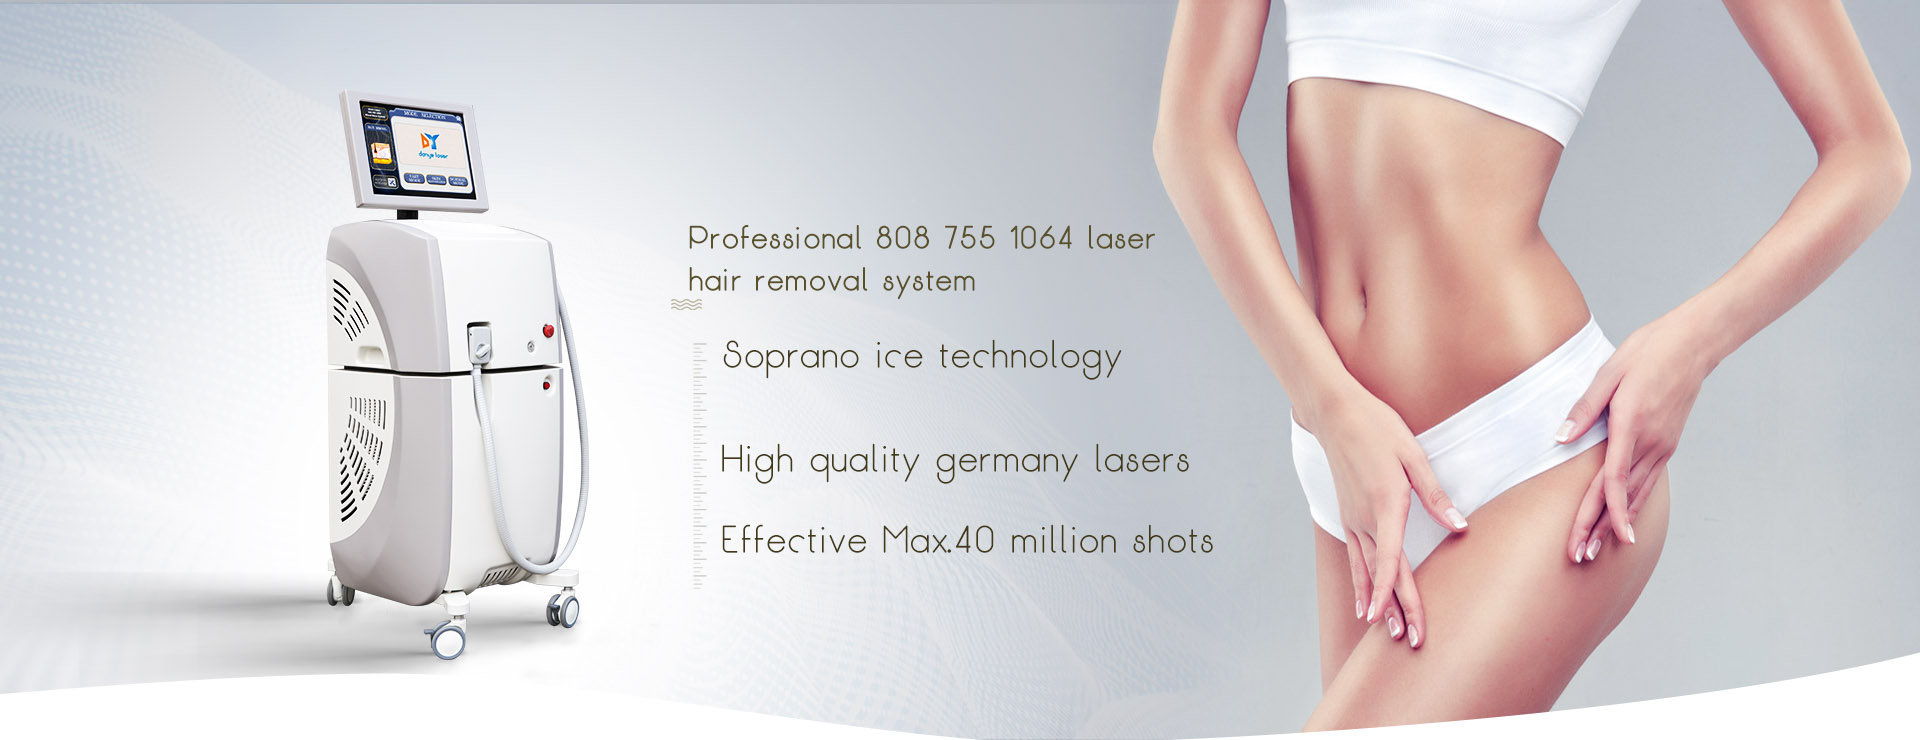 Mixed Wave Diode Laser 808nm 755nm and 1064 nm 3 Wavelengths Hair Removal Machine